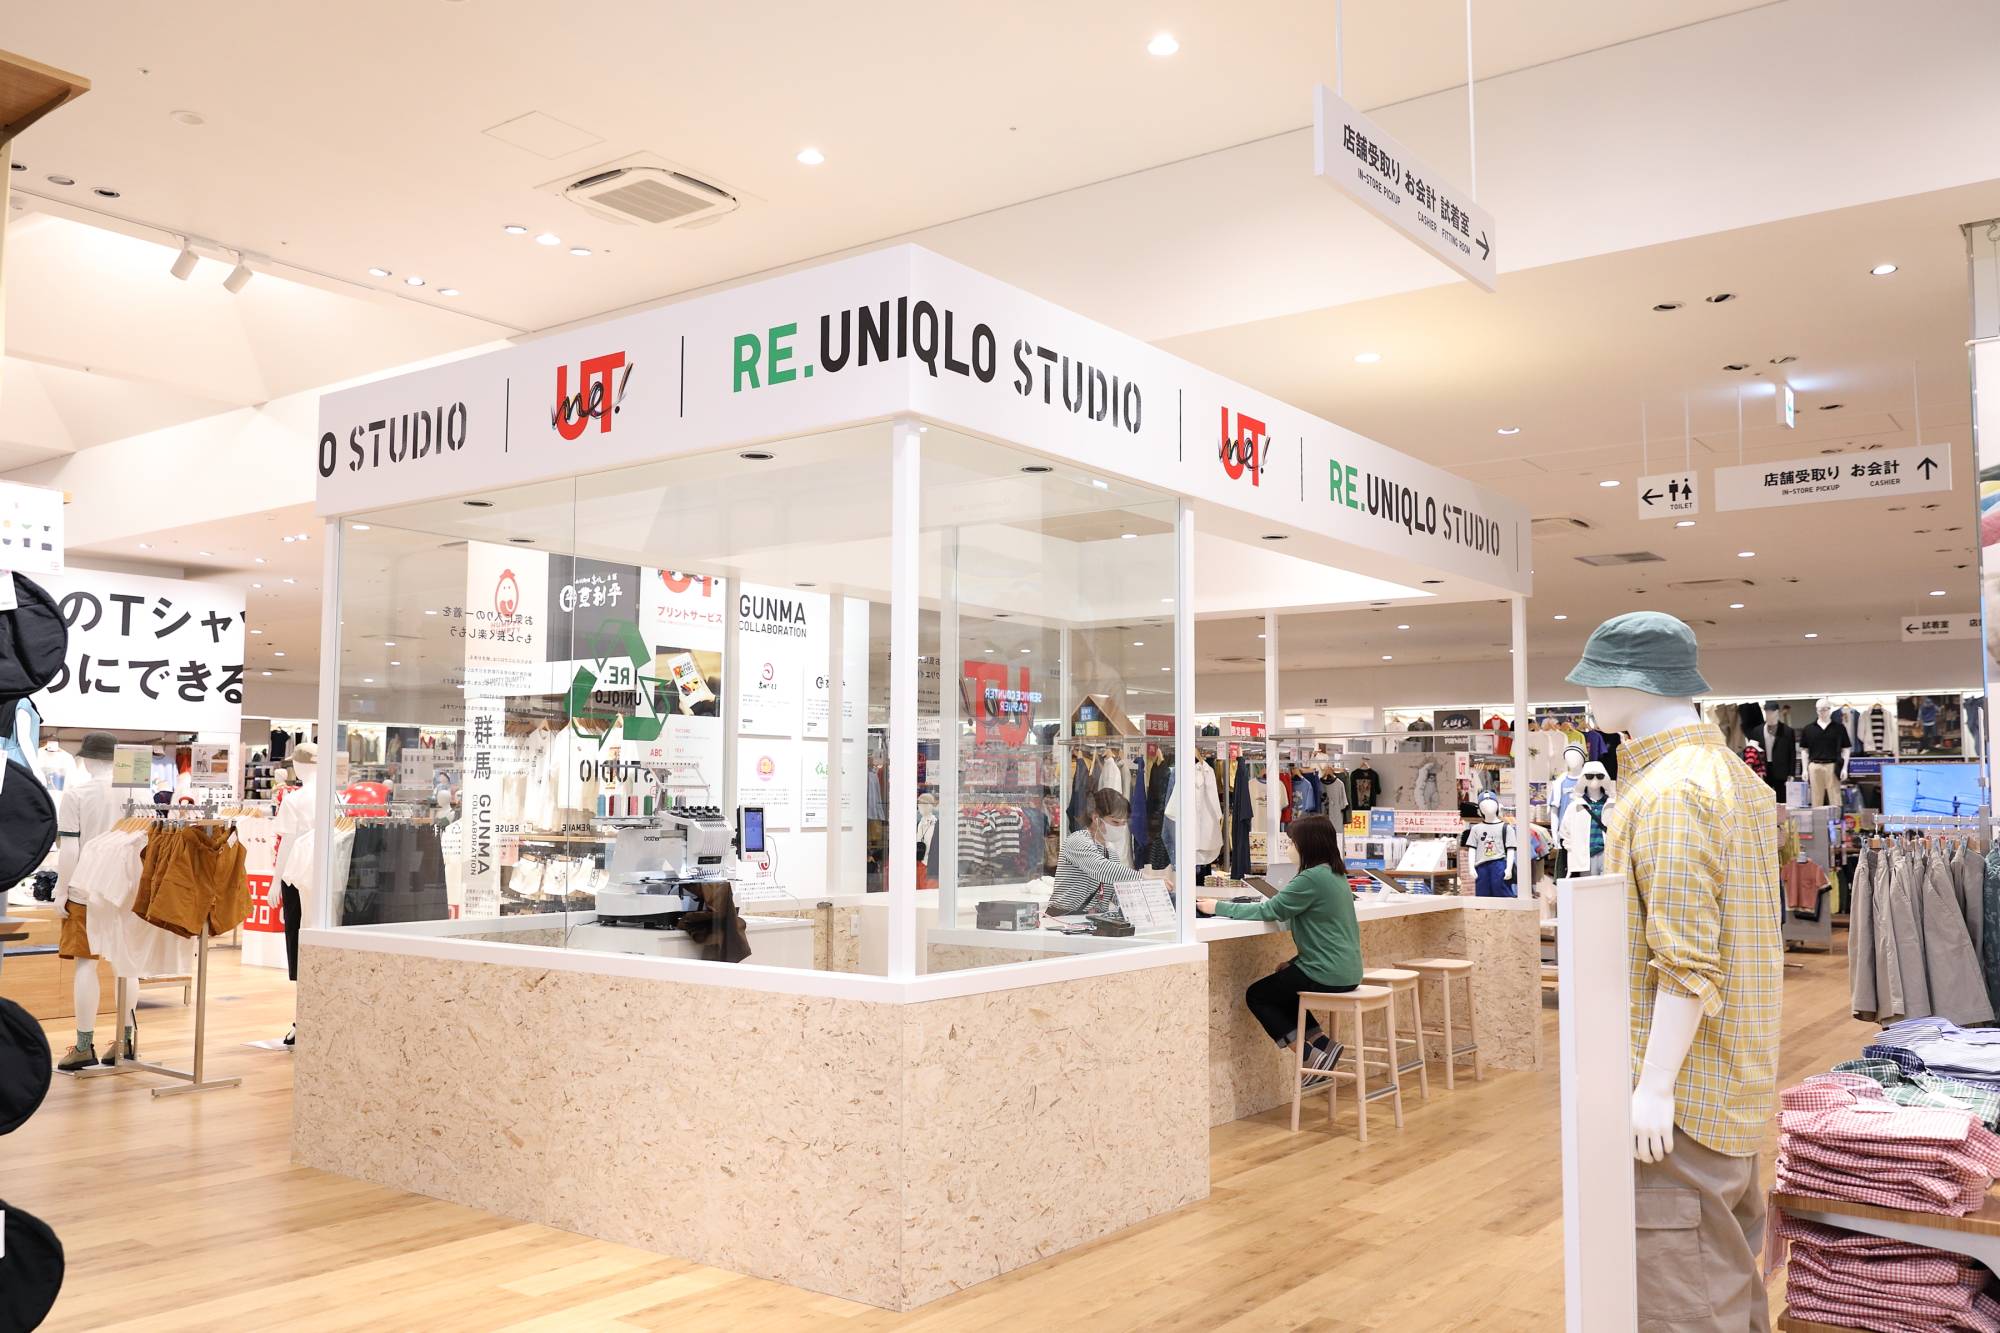 With eye on growth and sustainability targets, Uniqlo rethinks